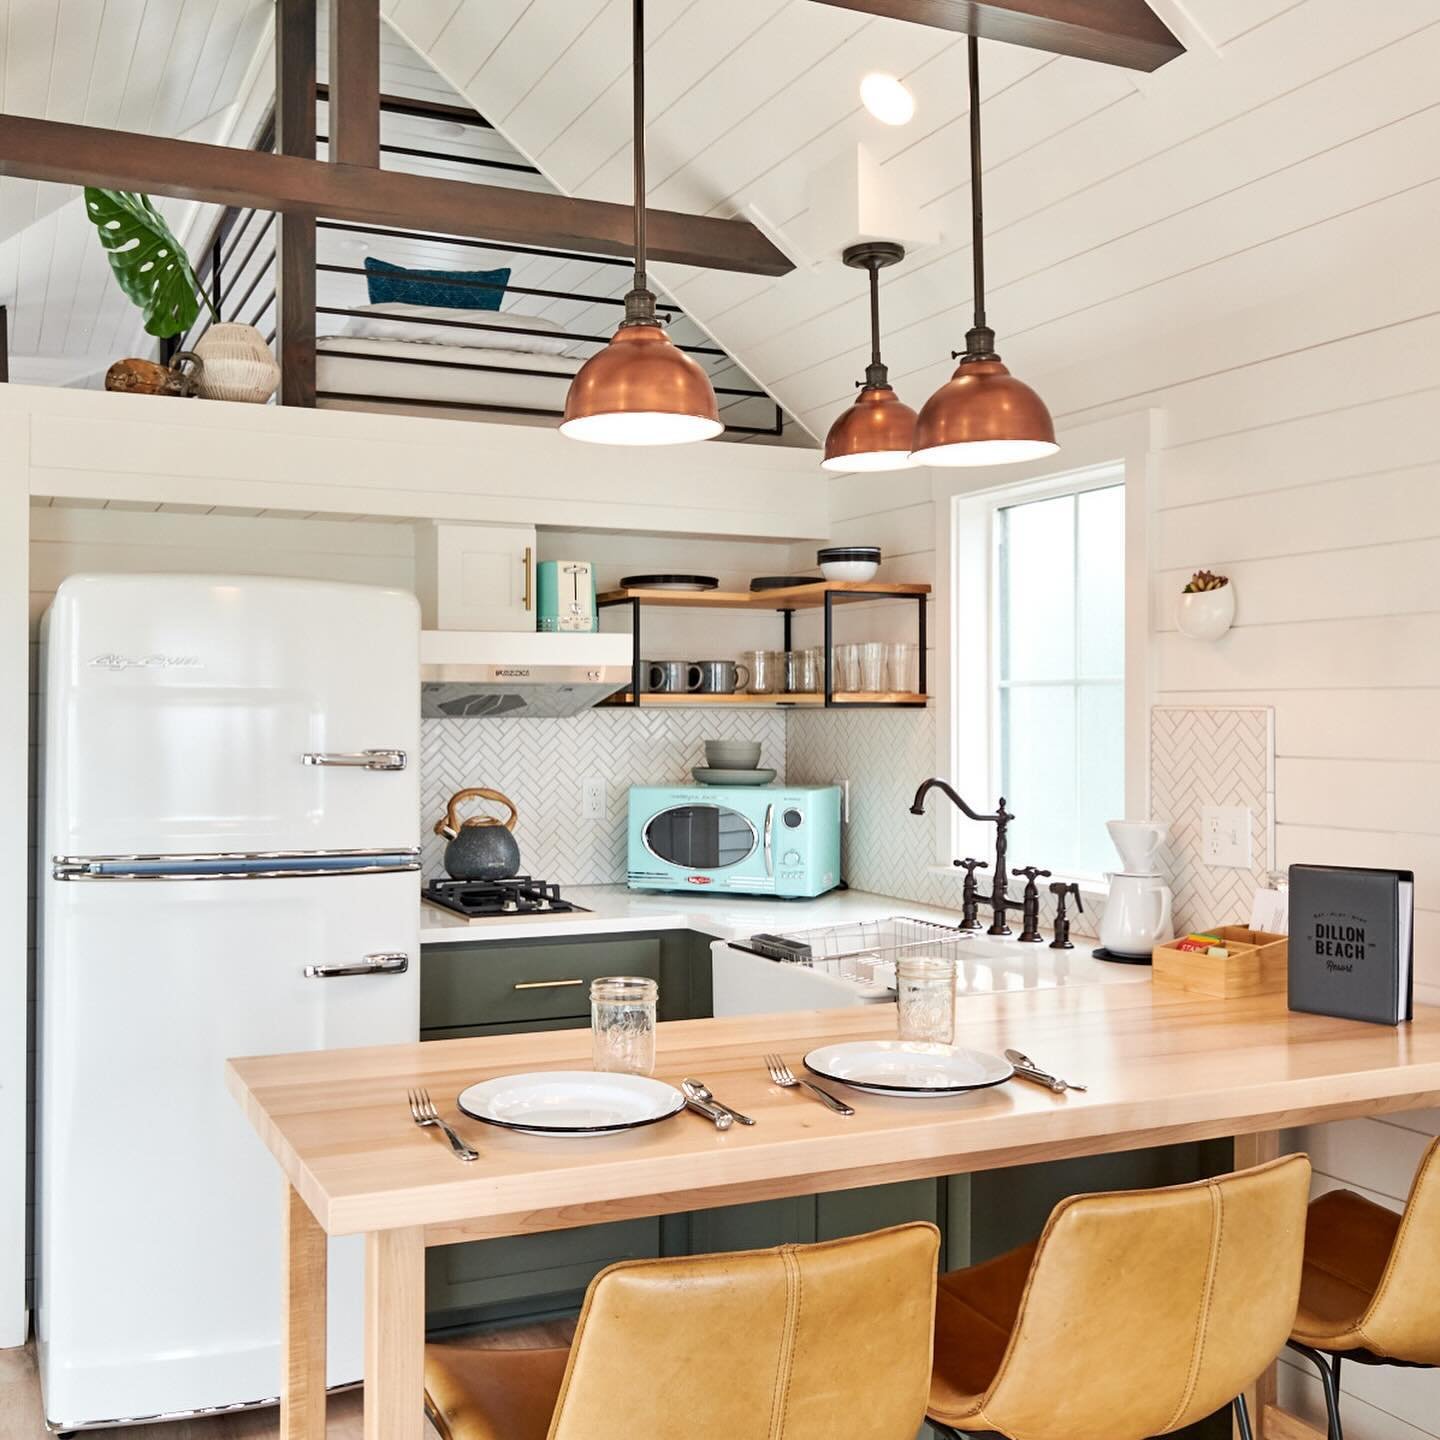 Check out our feature on @crowcanyonhome&rsquo;s website! We love all of our Crow Canyon enamelware and use it in the Coastal Kitchen and our Tiny Homes 🏠 
&bull;
&bull;
&bull;
#dillonbeach #dillonbeachresort #db #dbr #beachday #iamatraveler #westma